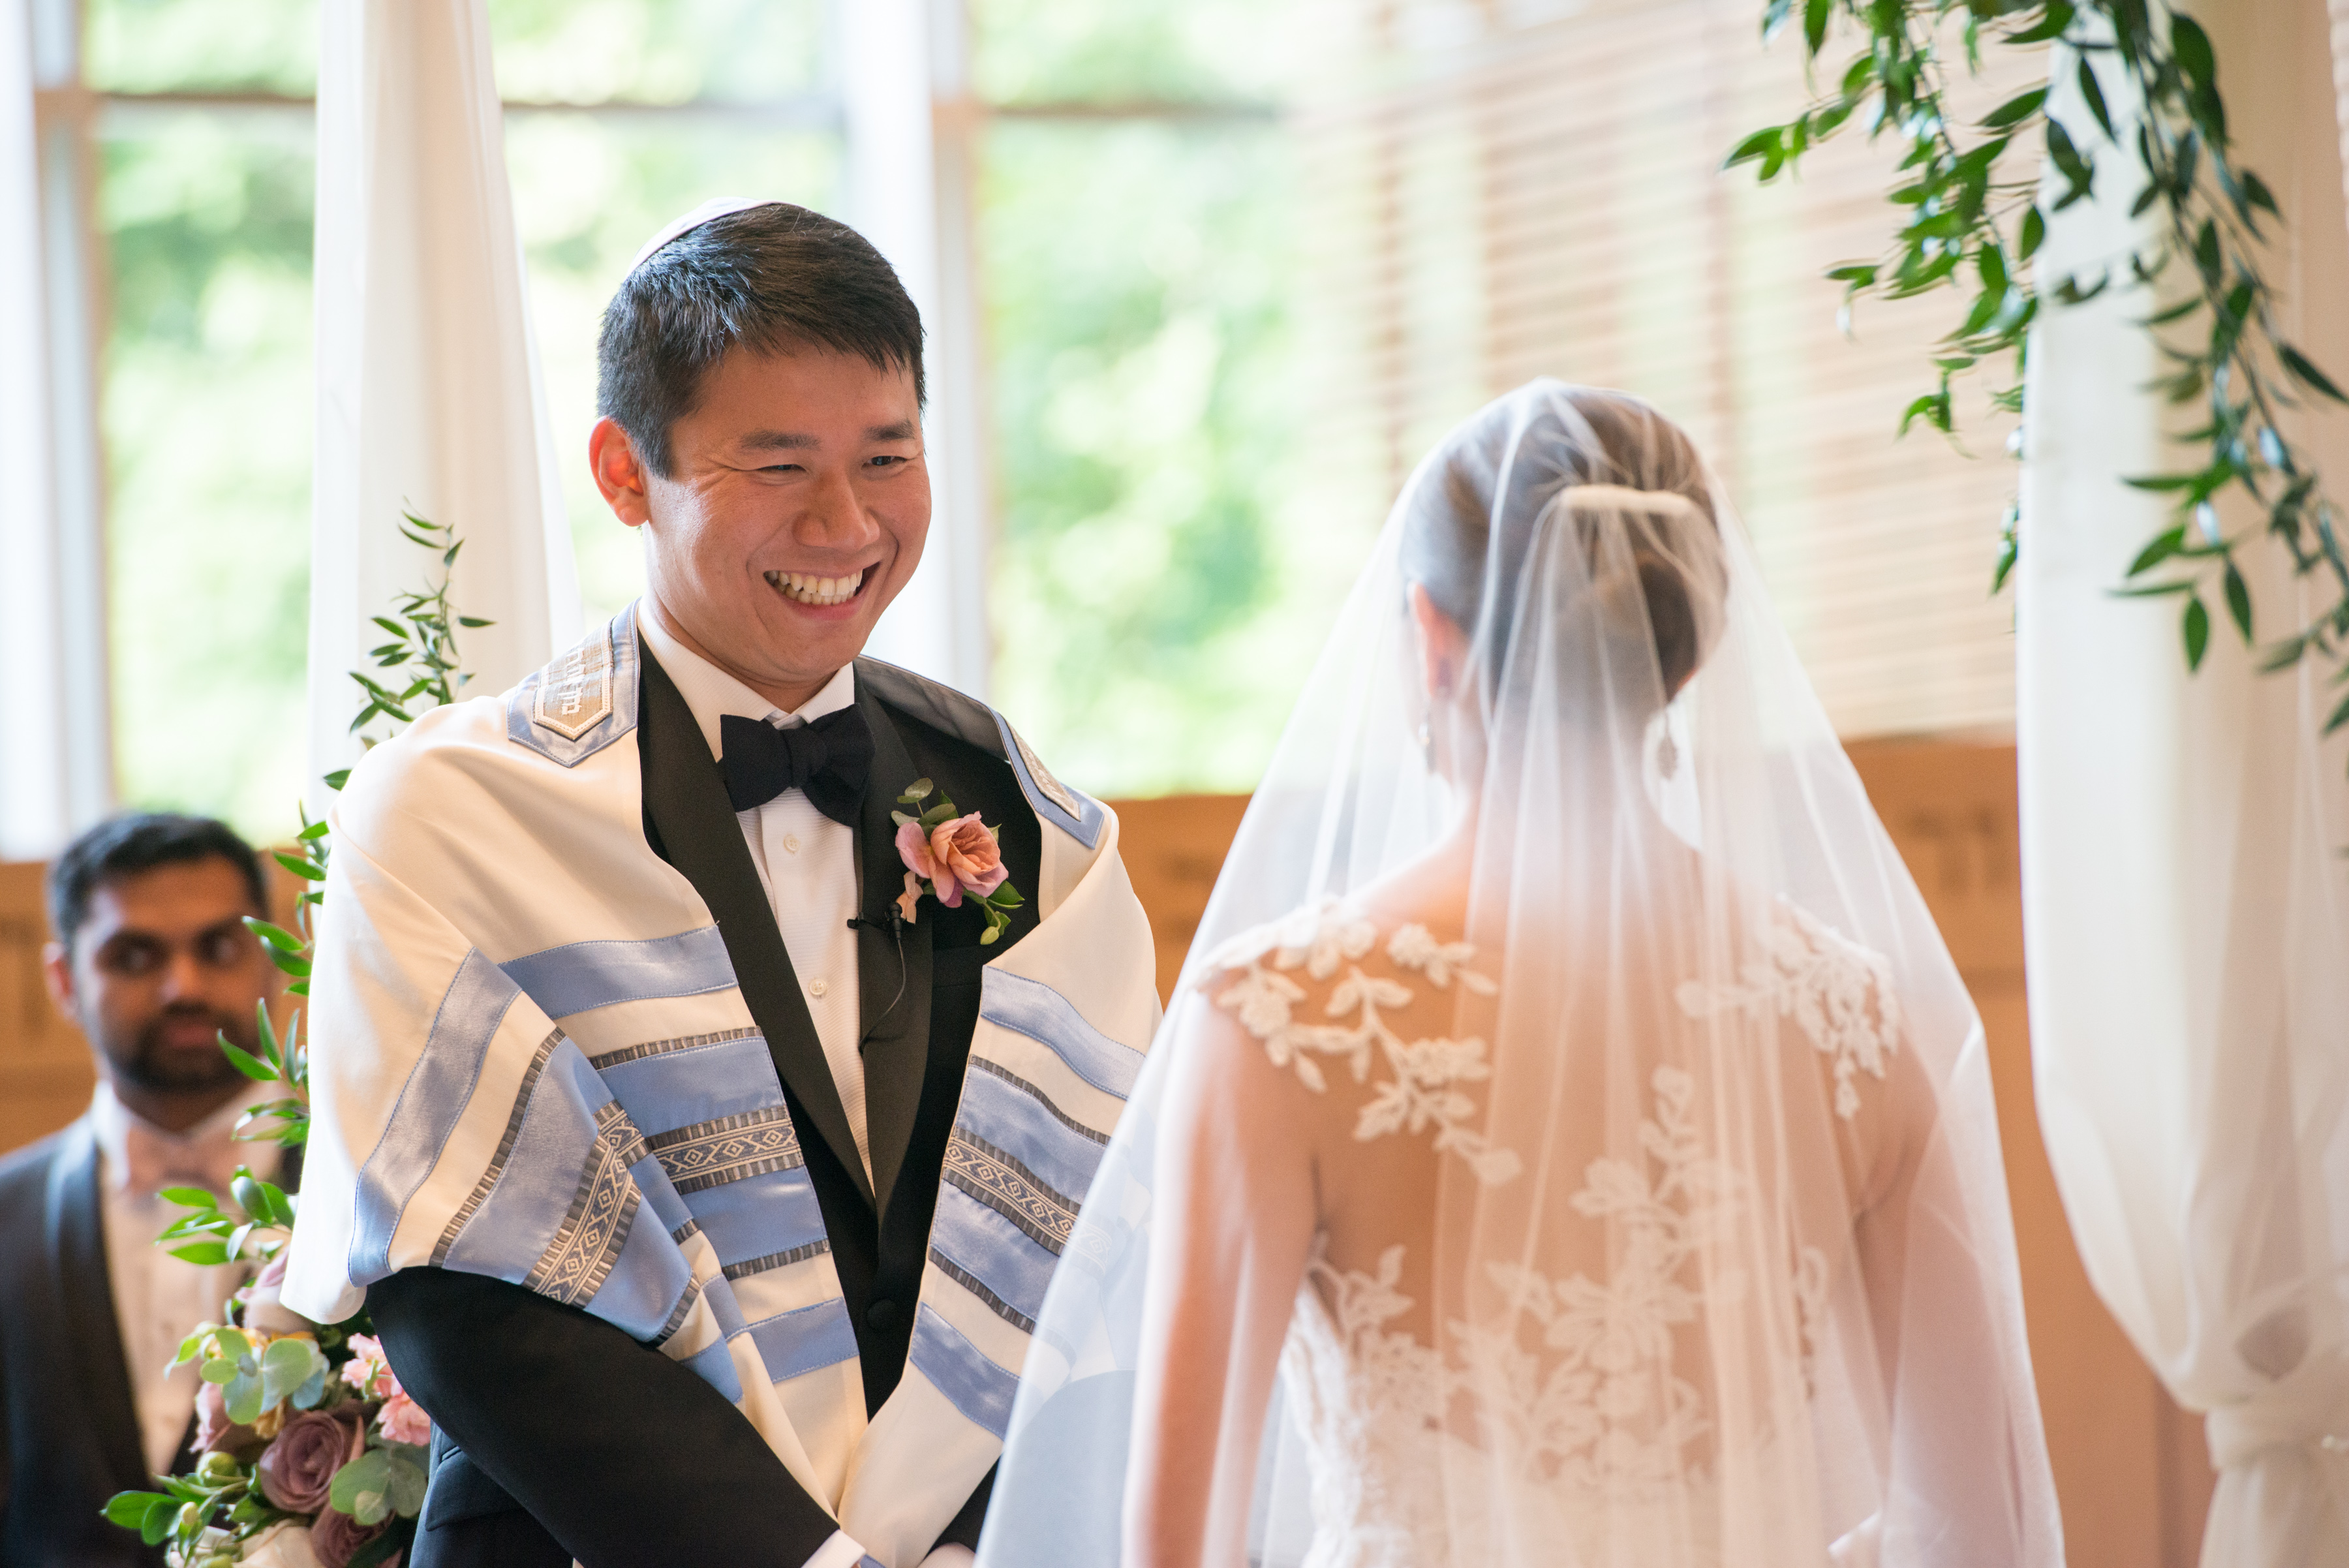 A man smiles at his bride during their wedding ceremony.